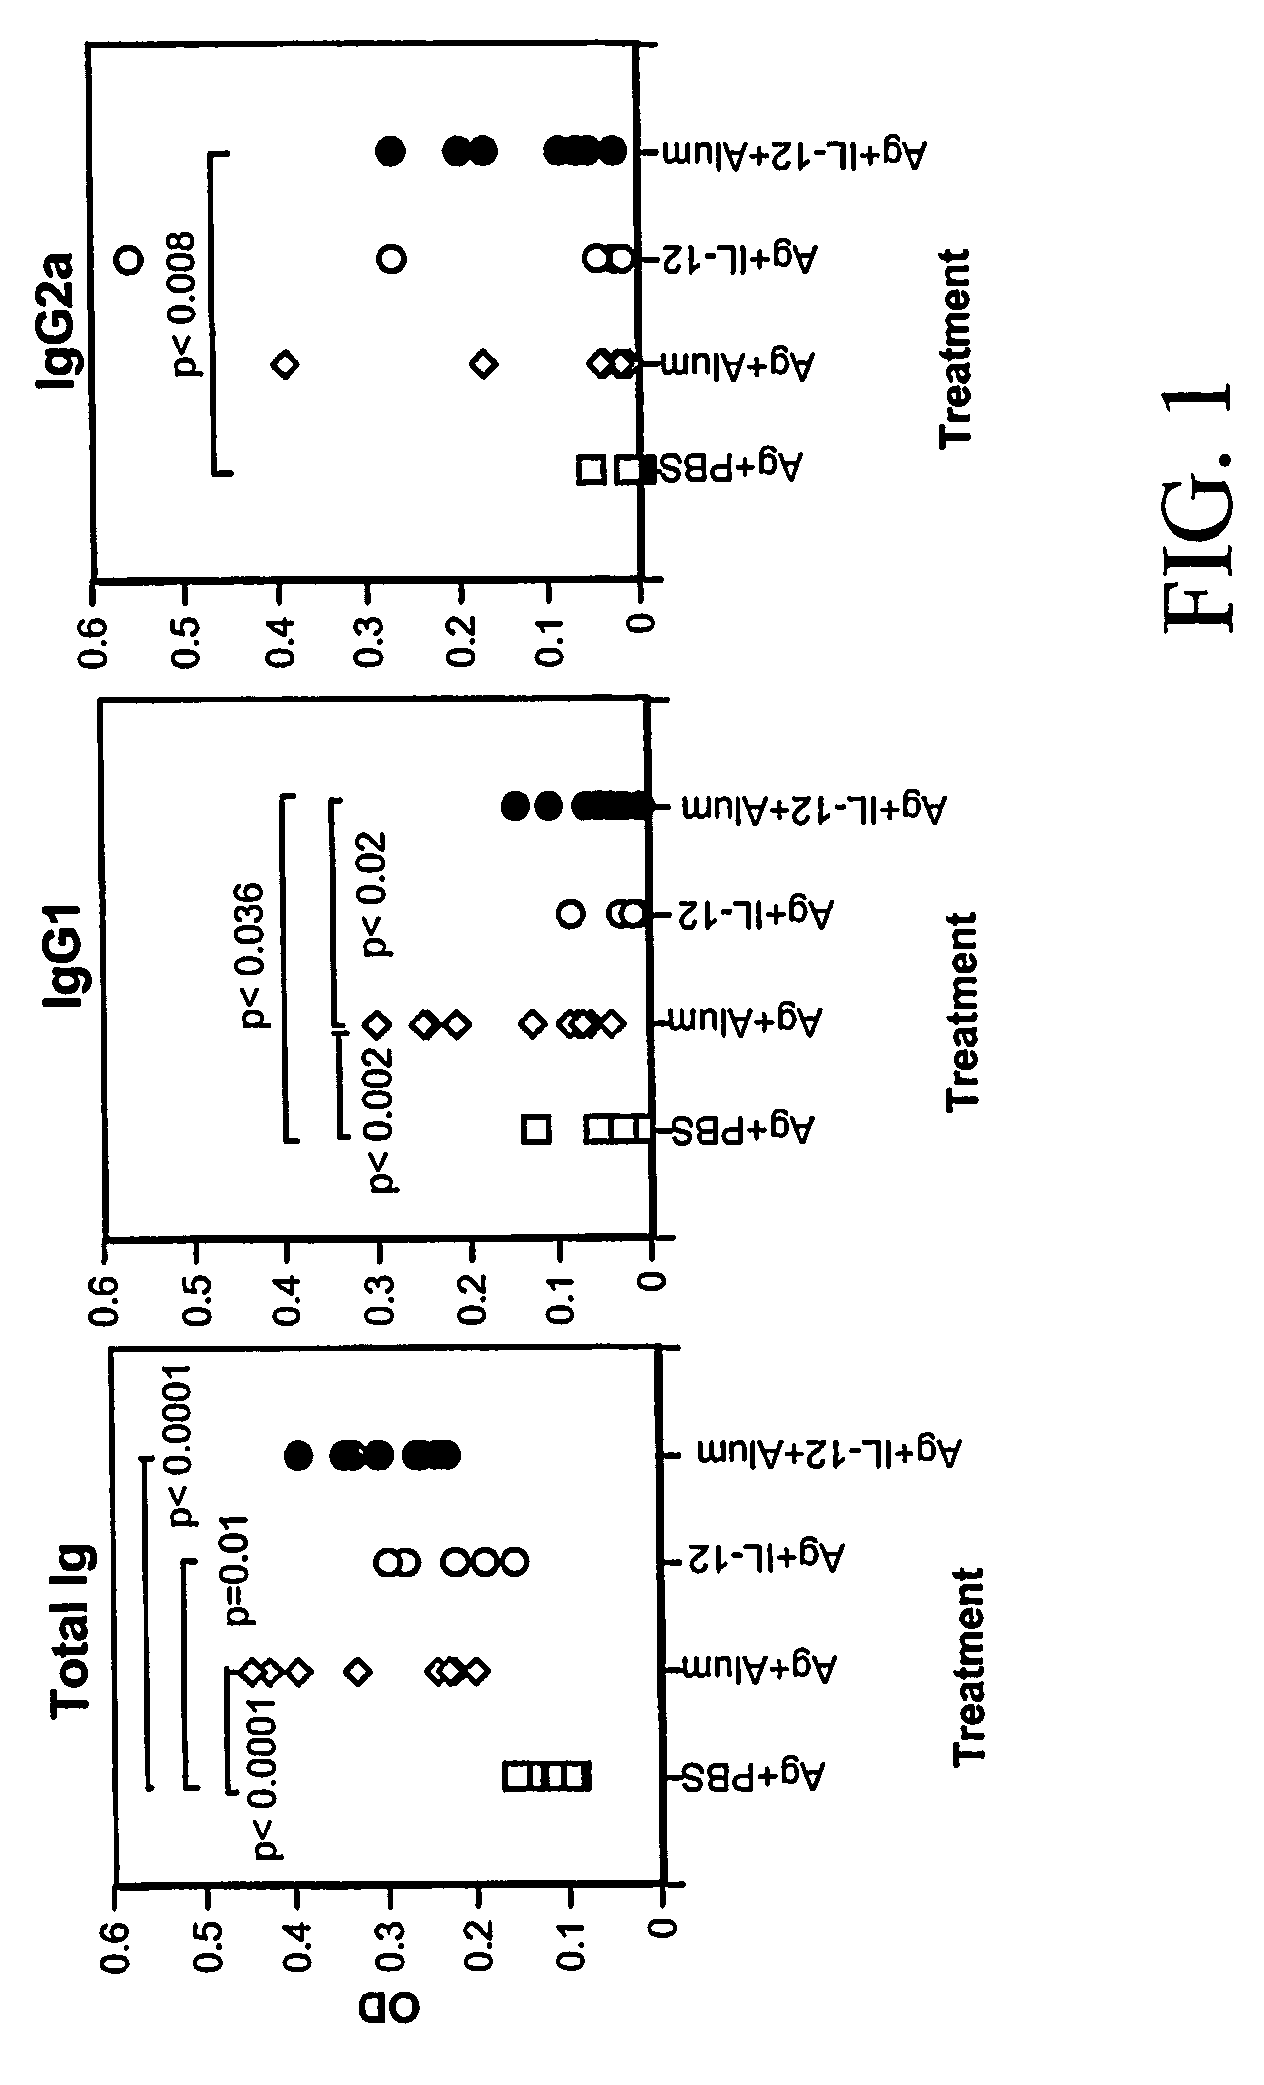 Immunogenic agent and pharmaceutical composition for use against homologous and heterologous pathogens